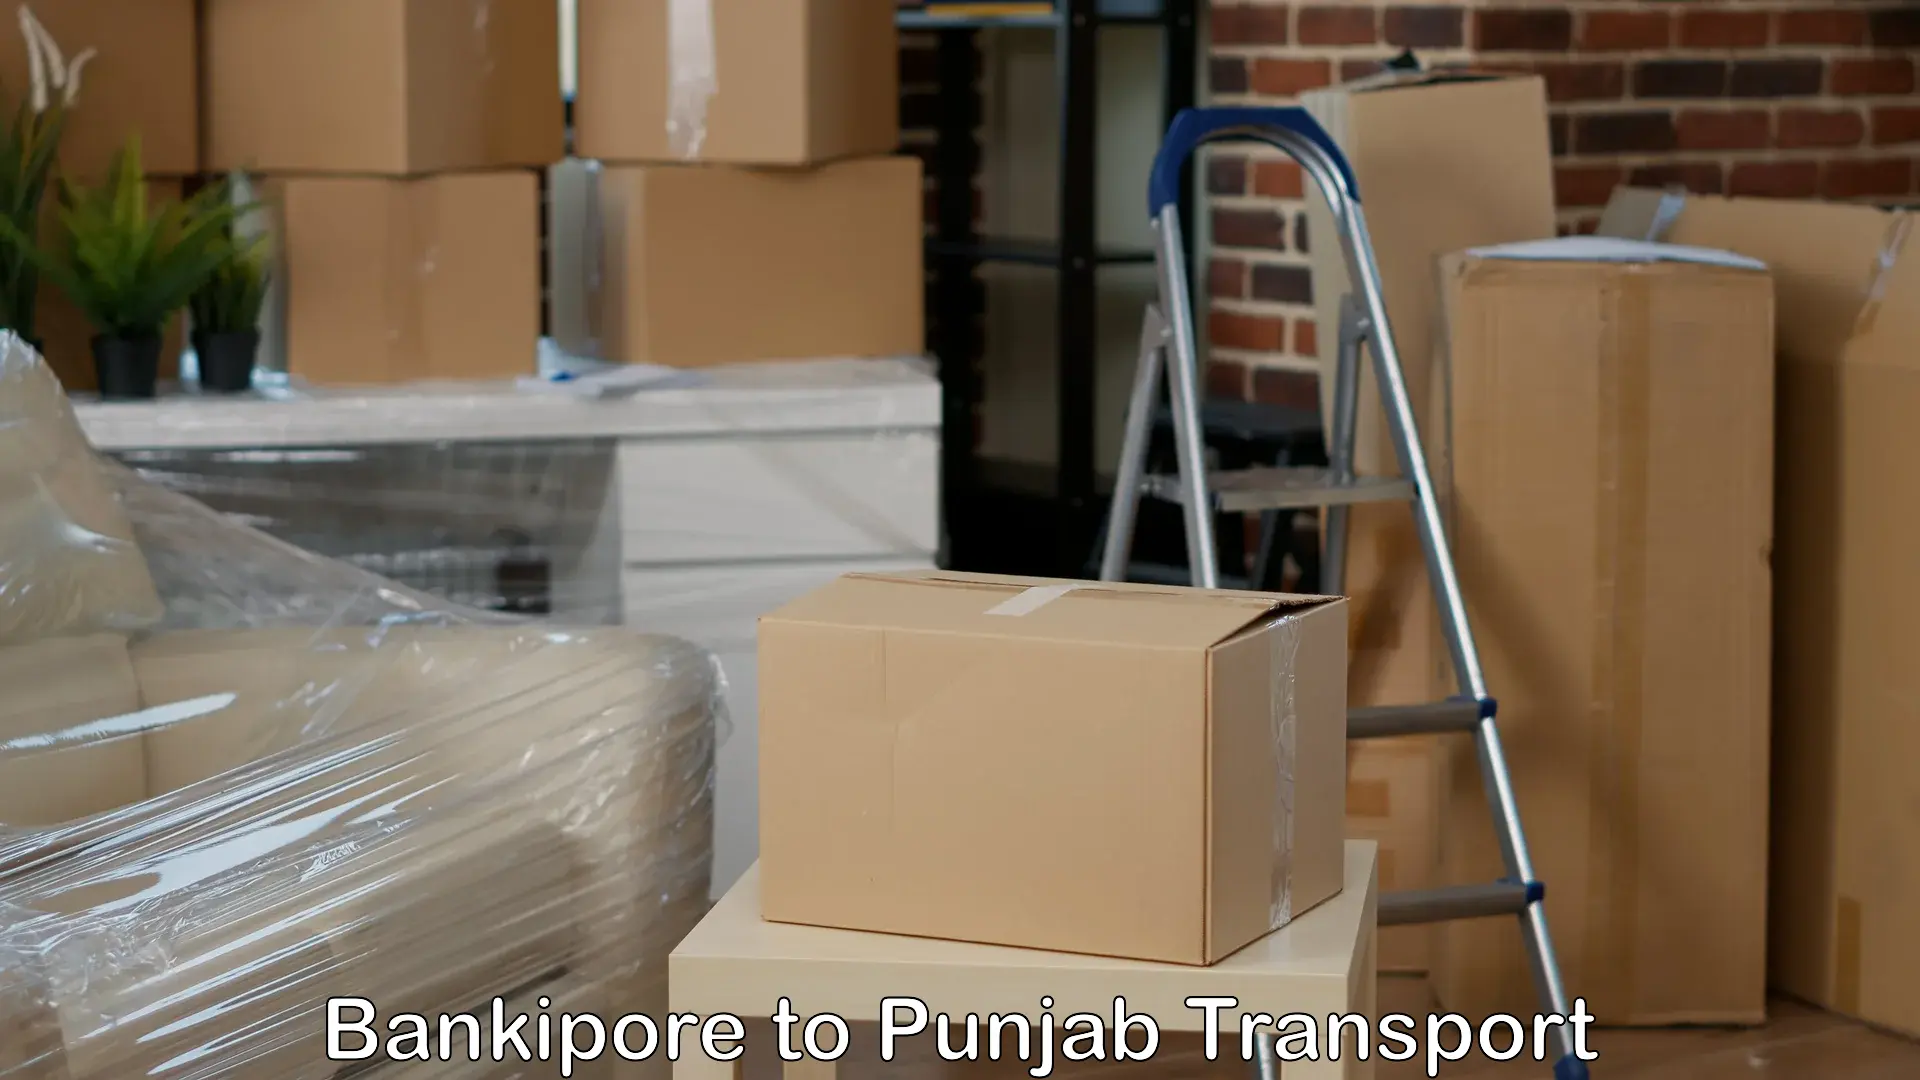 Truck transport companies in India Bankipore to Batala